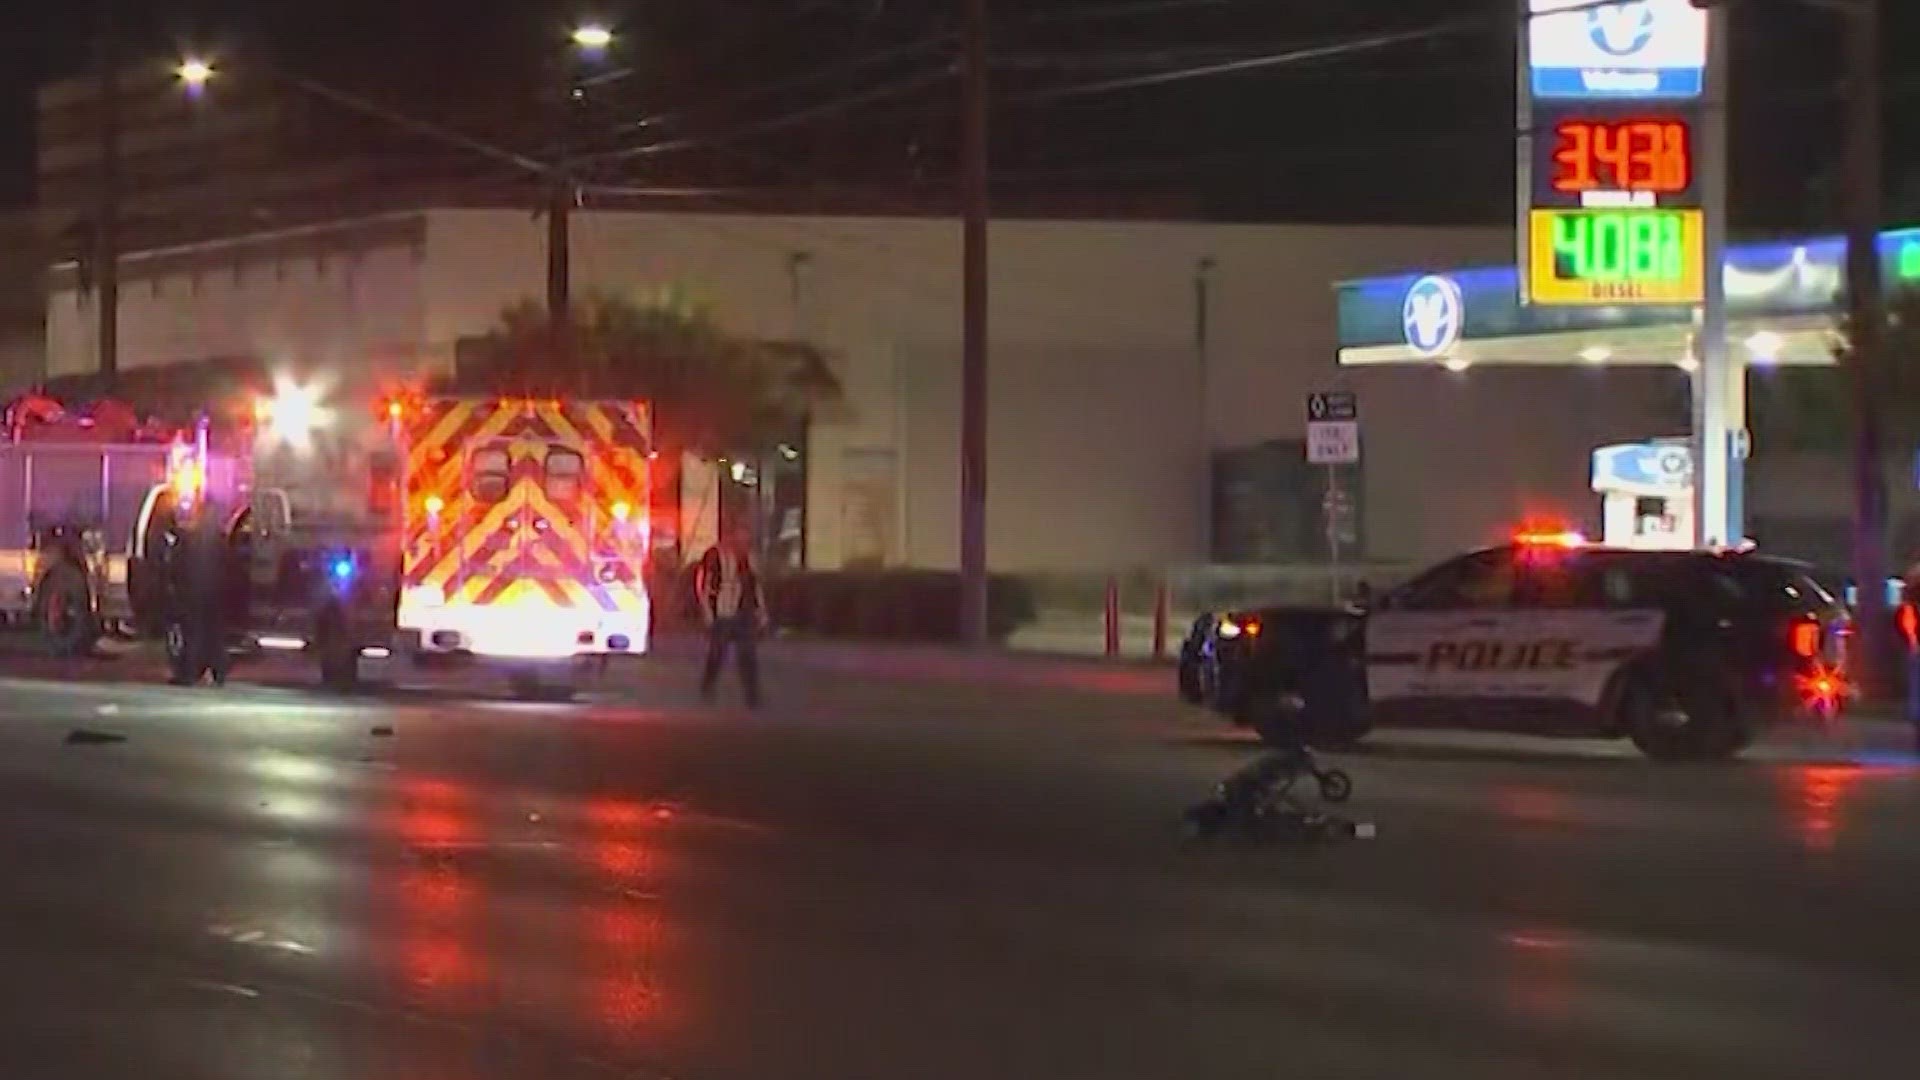 A man was hit and killed by a car while in his wheelchair late Monday night at Culebra and Van Ness Drive, police say.